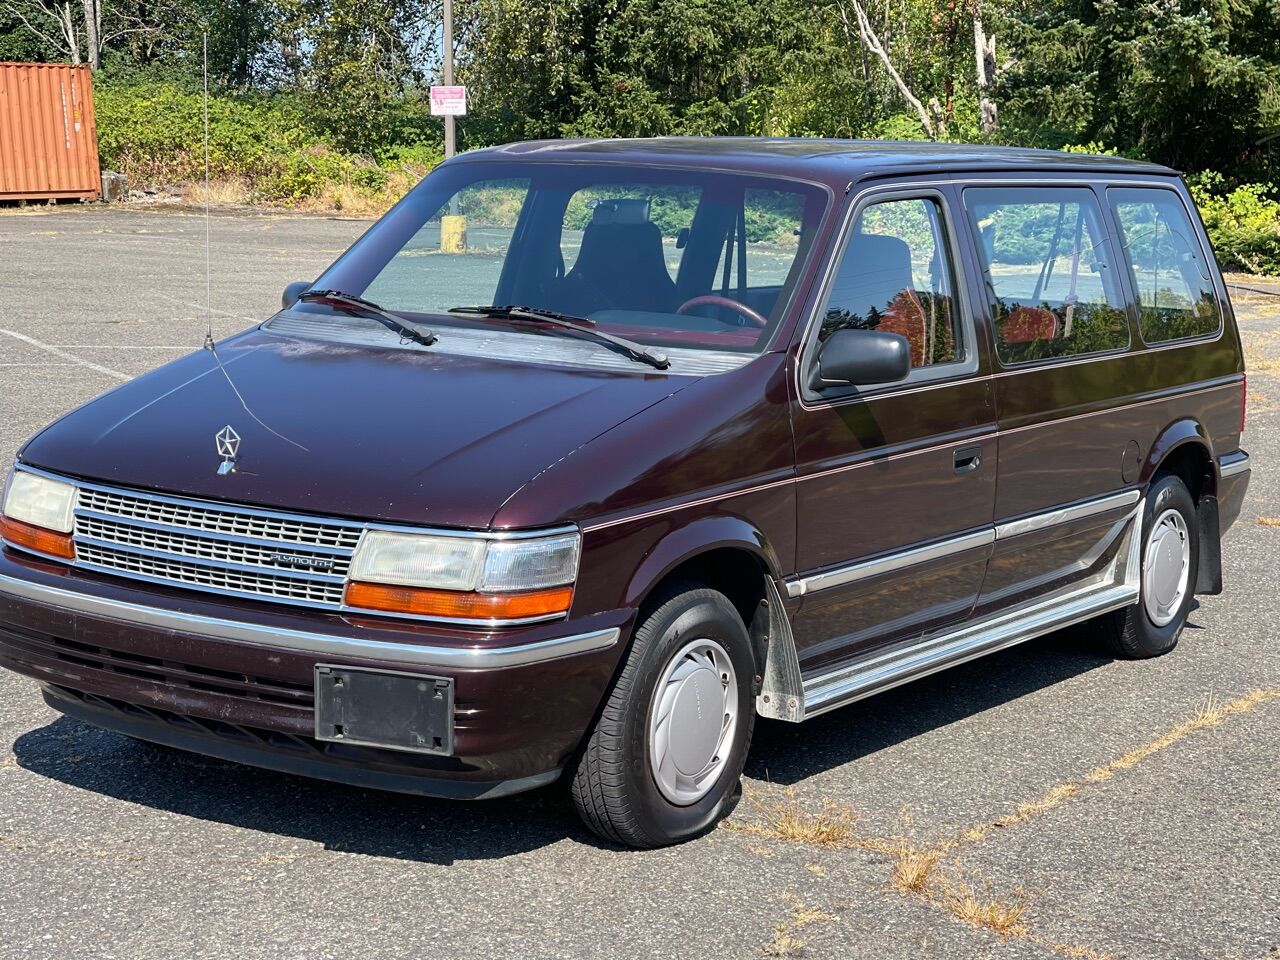 Plymouth Voyager For Sale - Carsforsale.com®